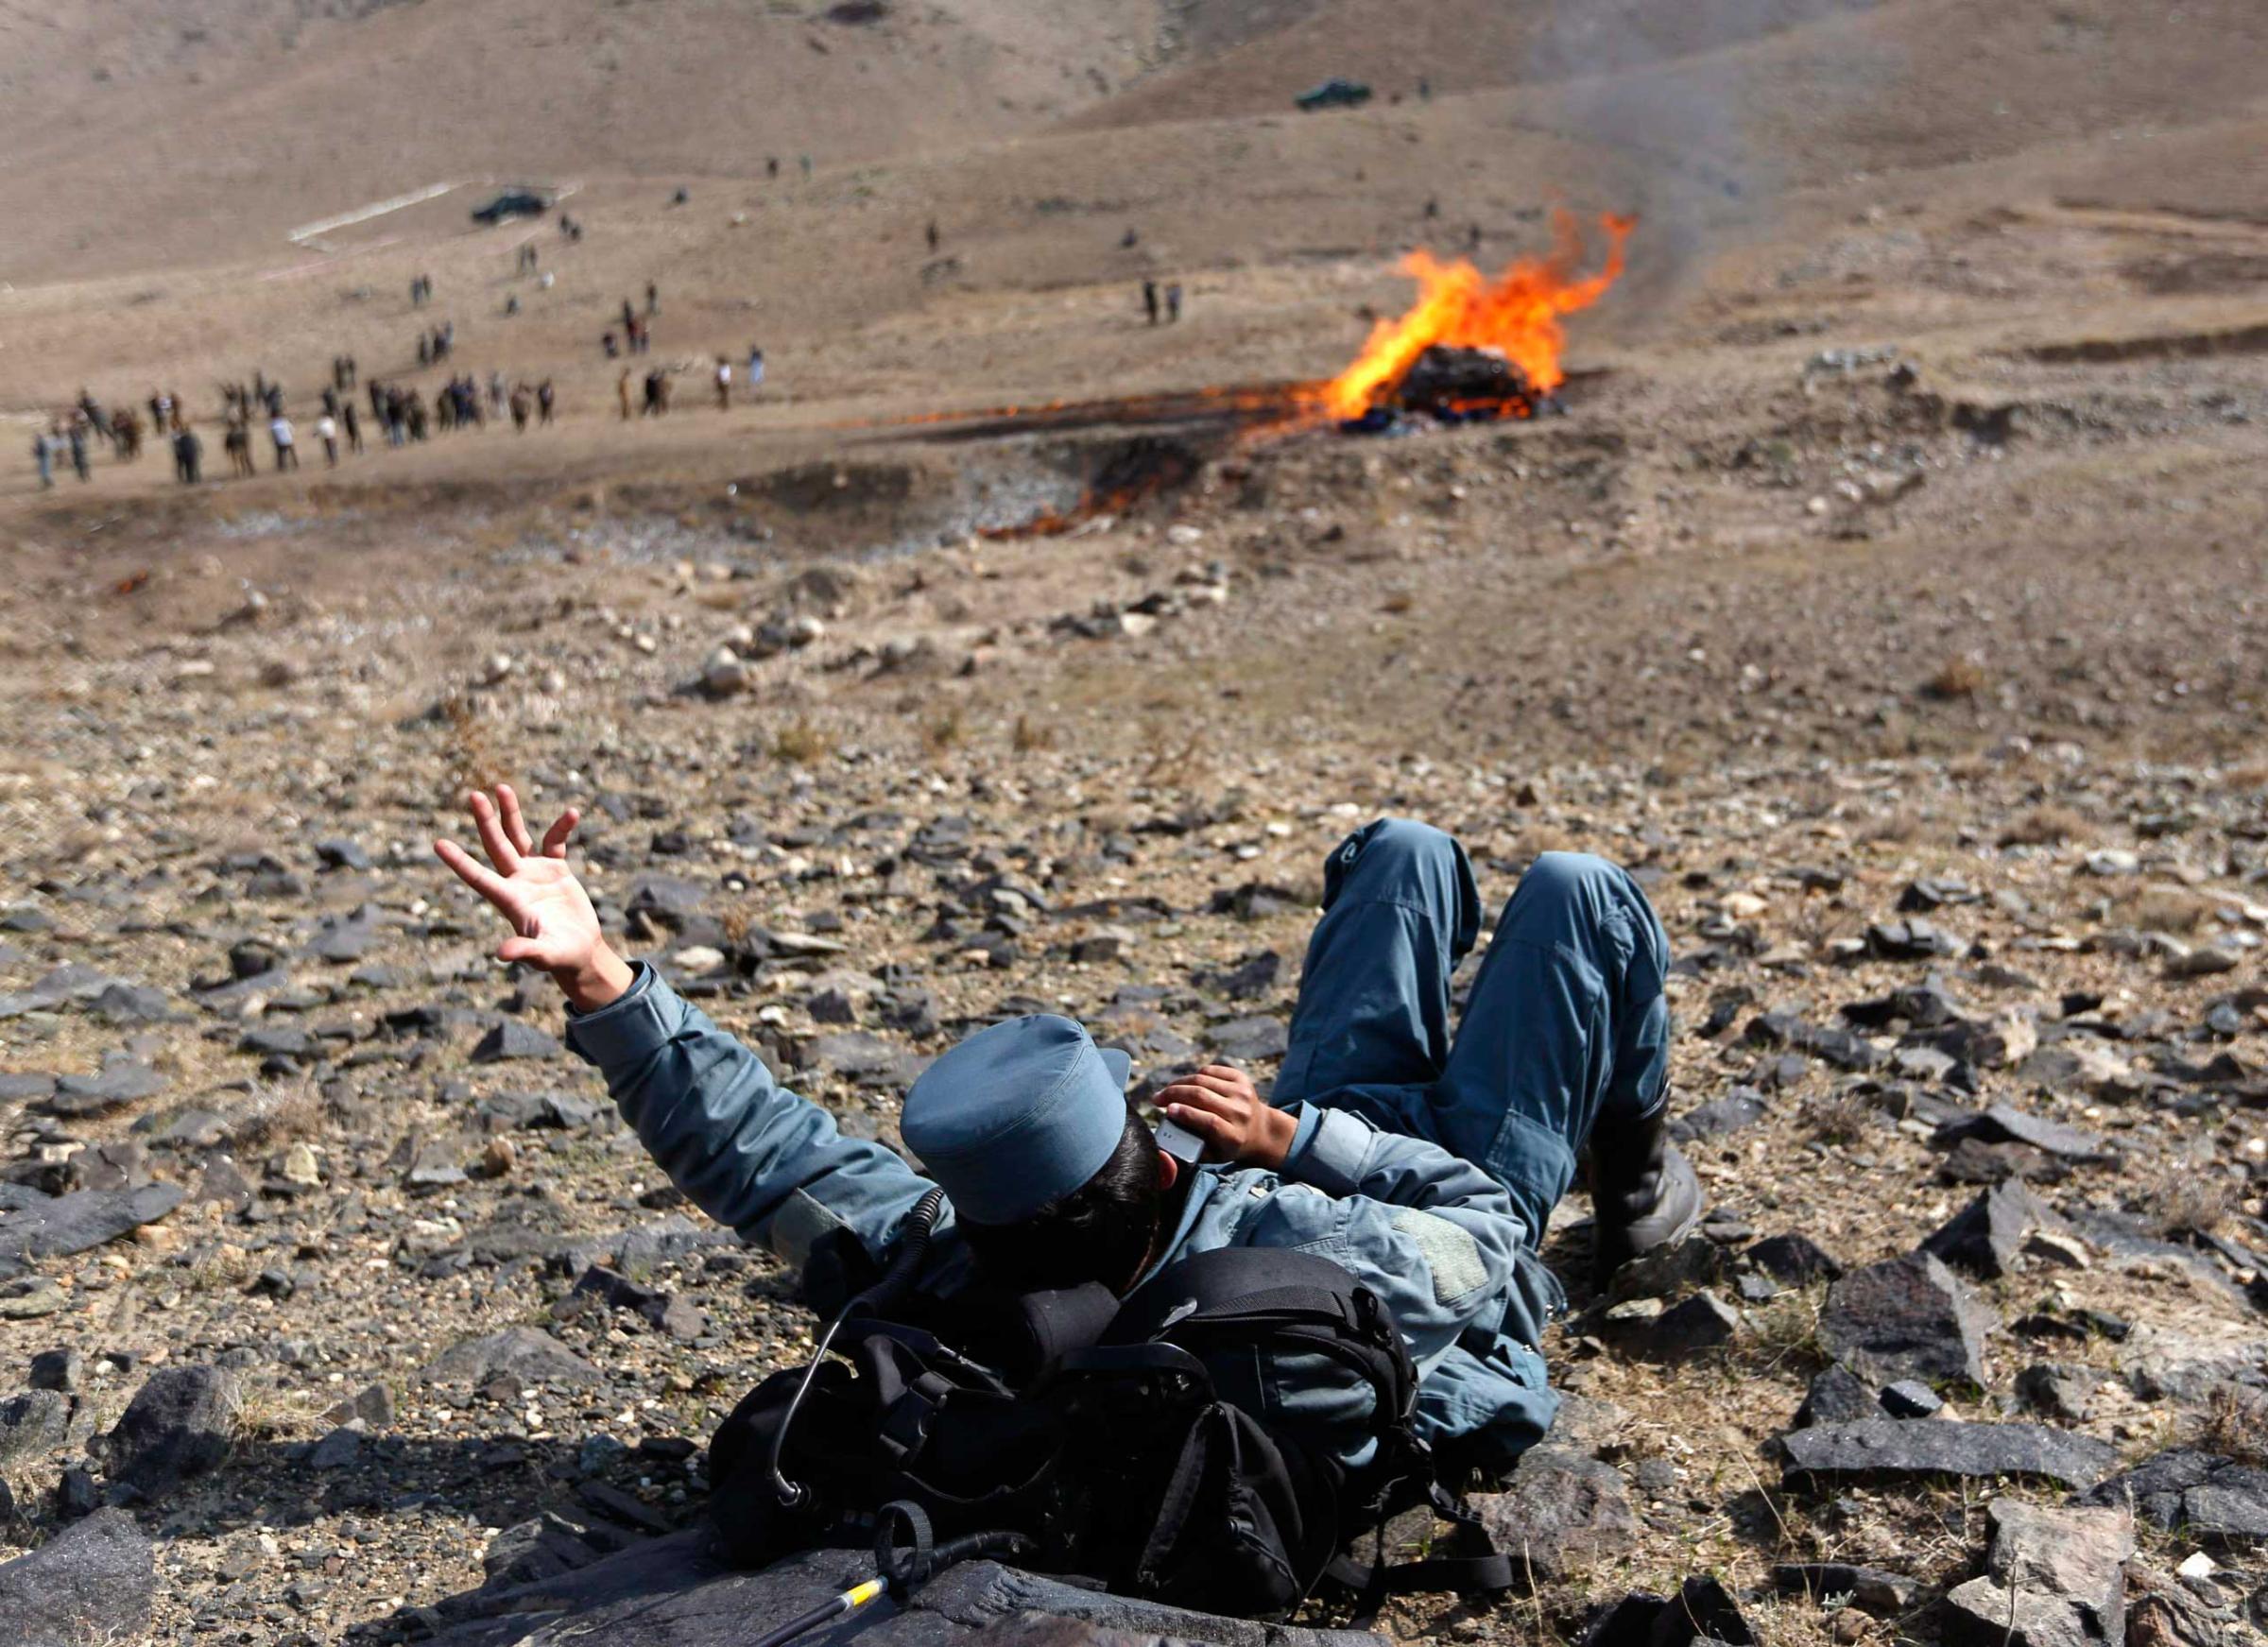 An Afghan policeman talks on his phone during the burning of illegal narcotics on the outskirts of Kabul